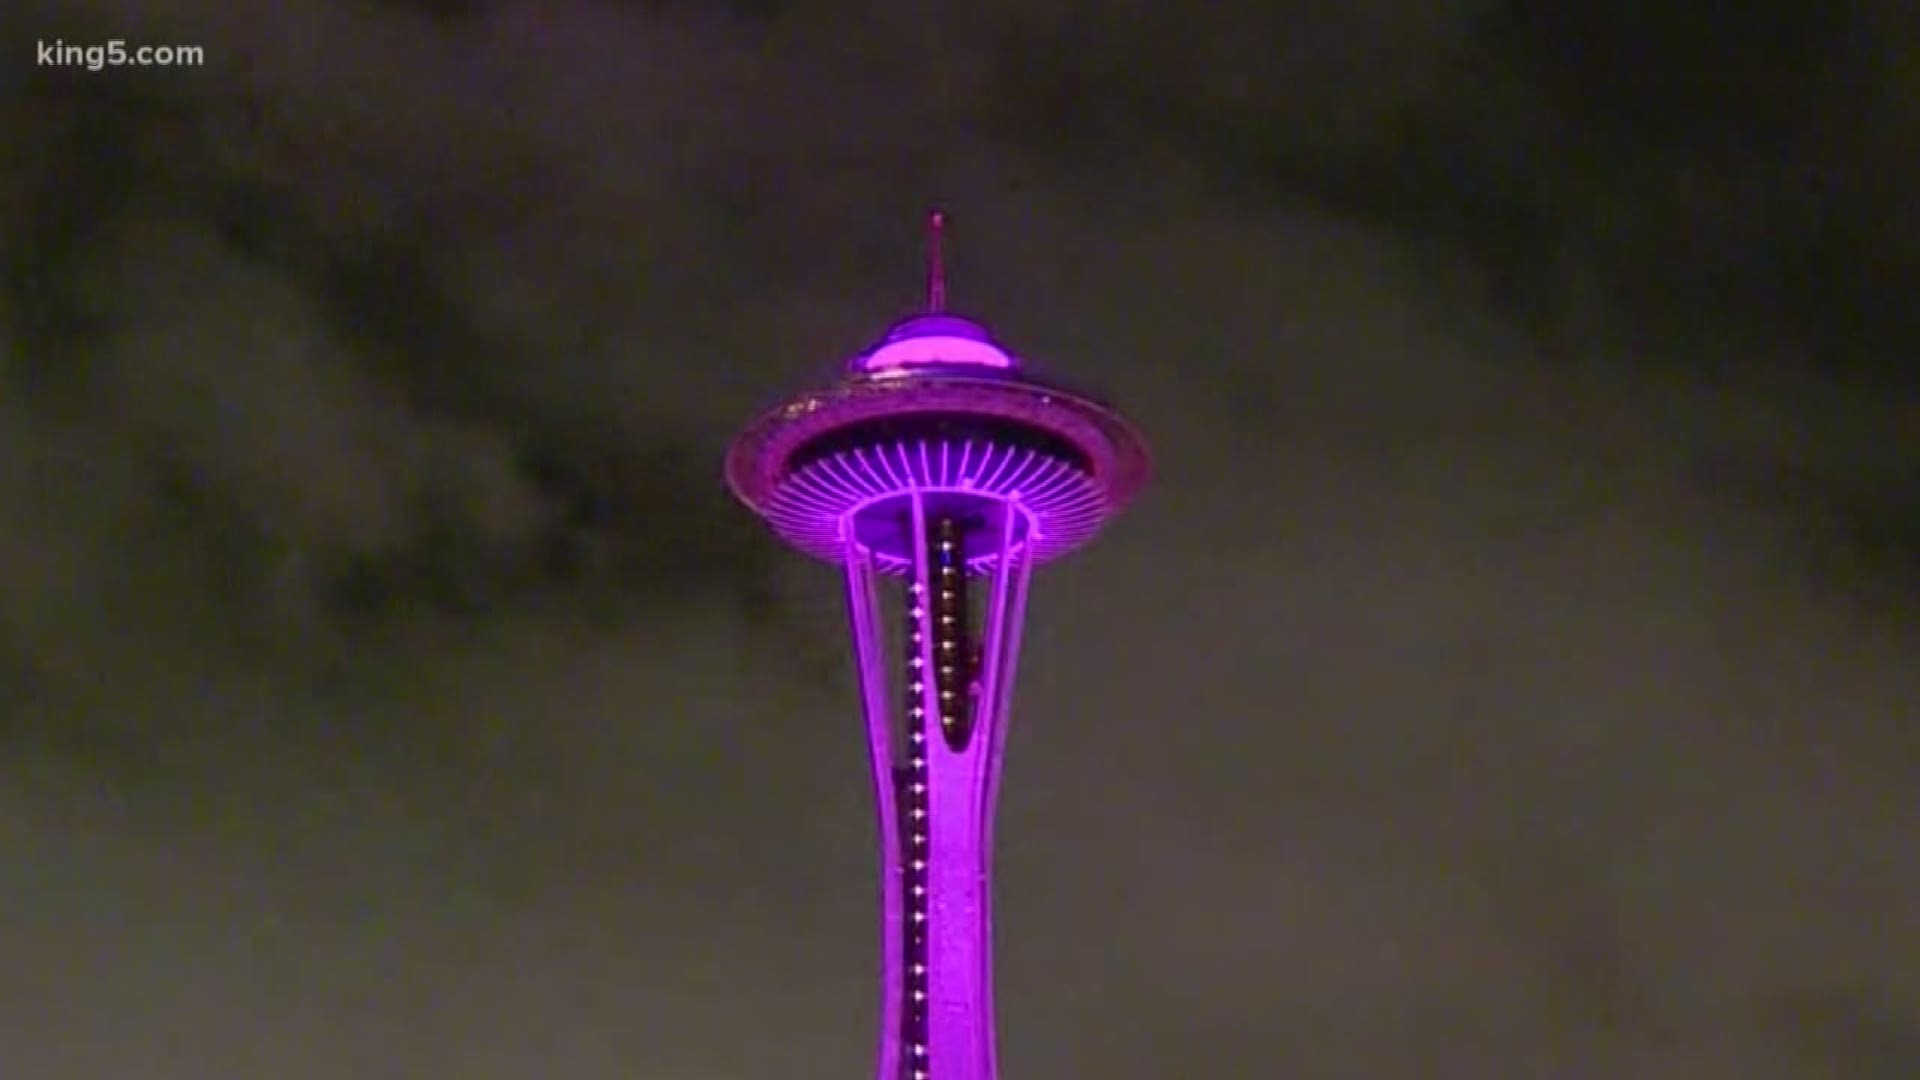 Seattle rang in the new year with a light show atop the Space Needle after high winds forced the cancellation of the fireworks display. KING 5's Sebastian Robertson.